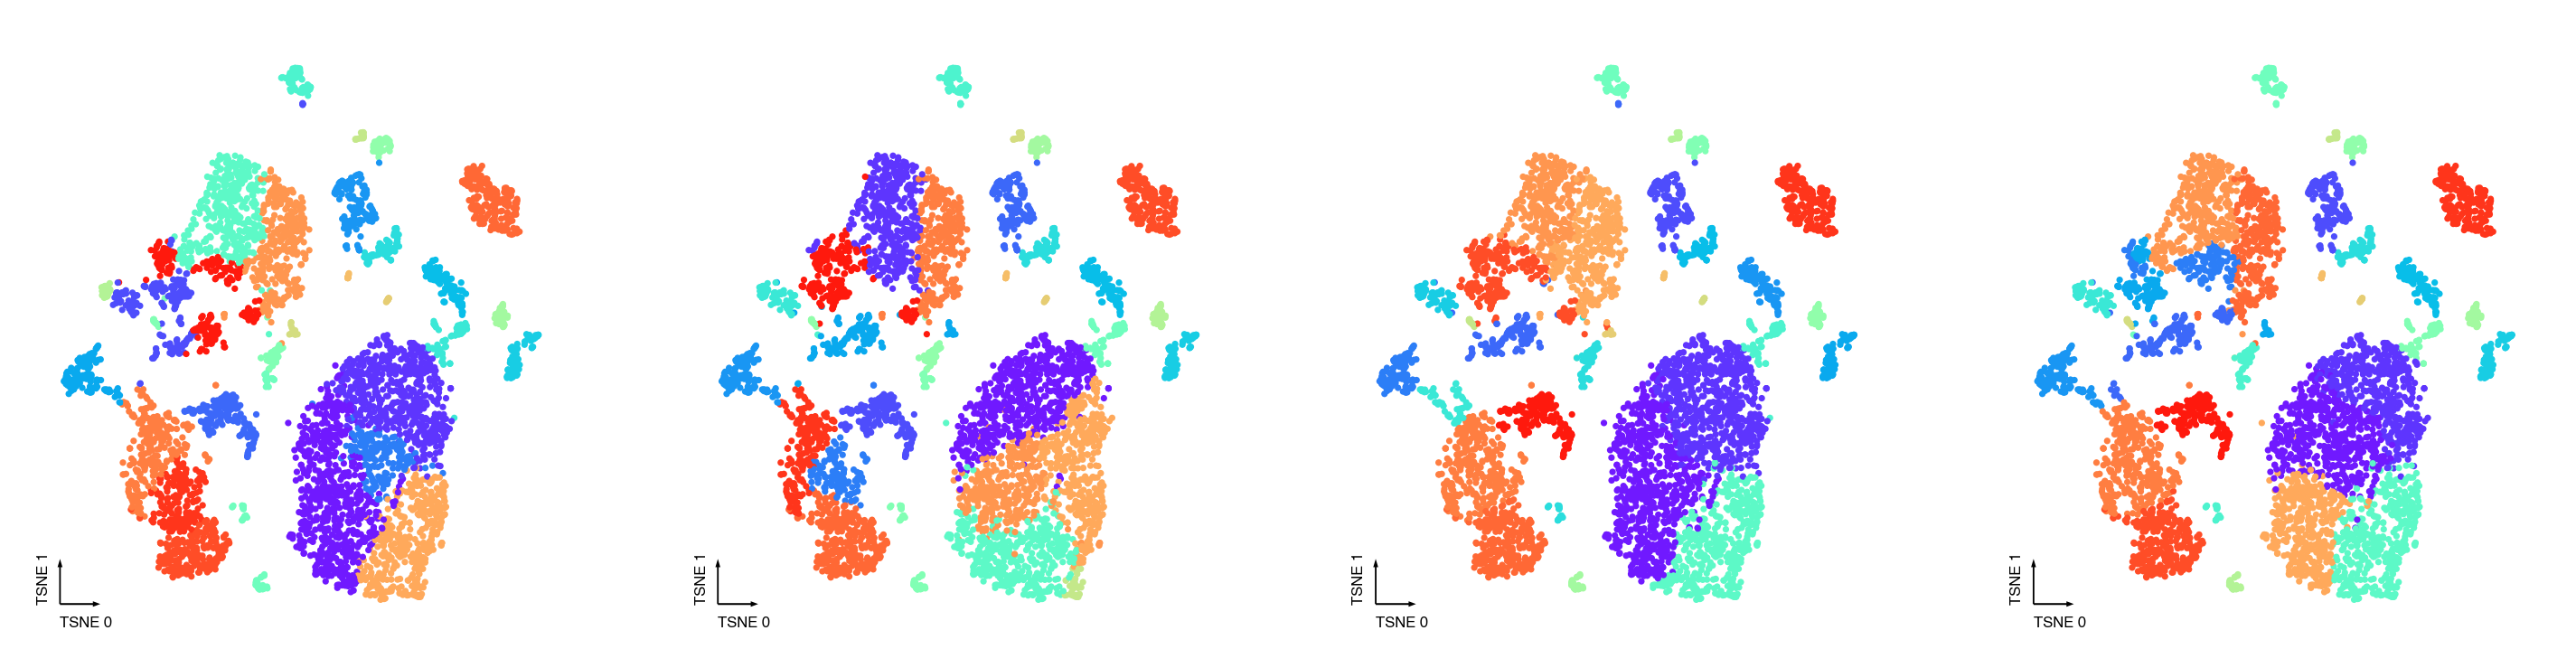 ../../../_images/06-Clustering_13_0.png